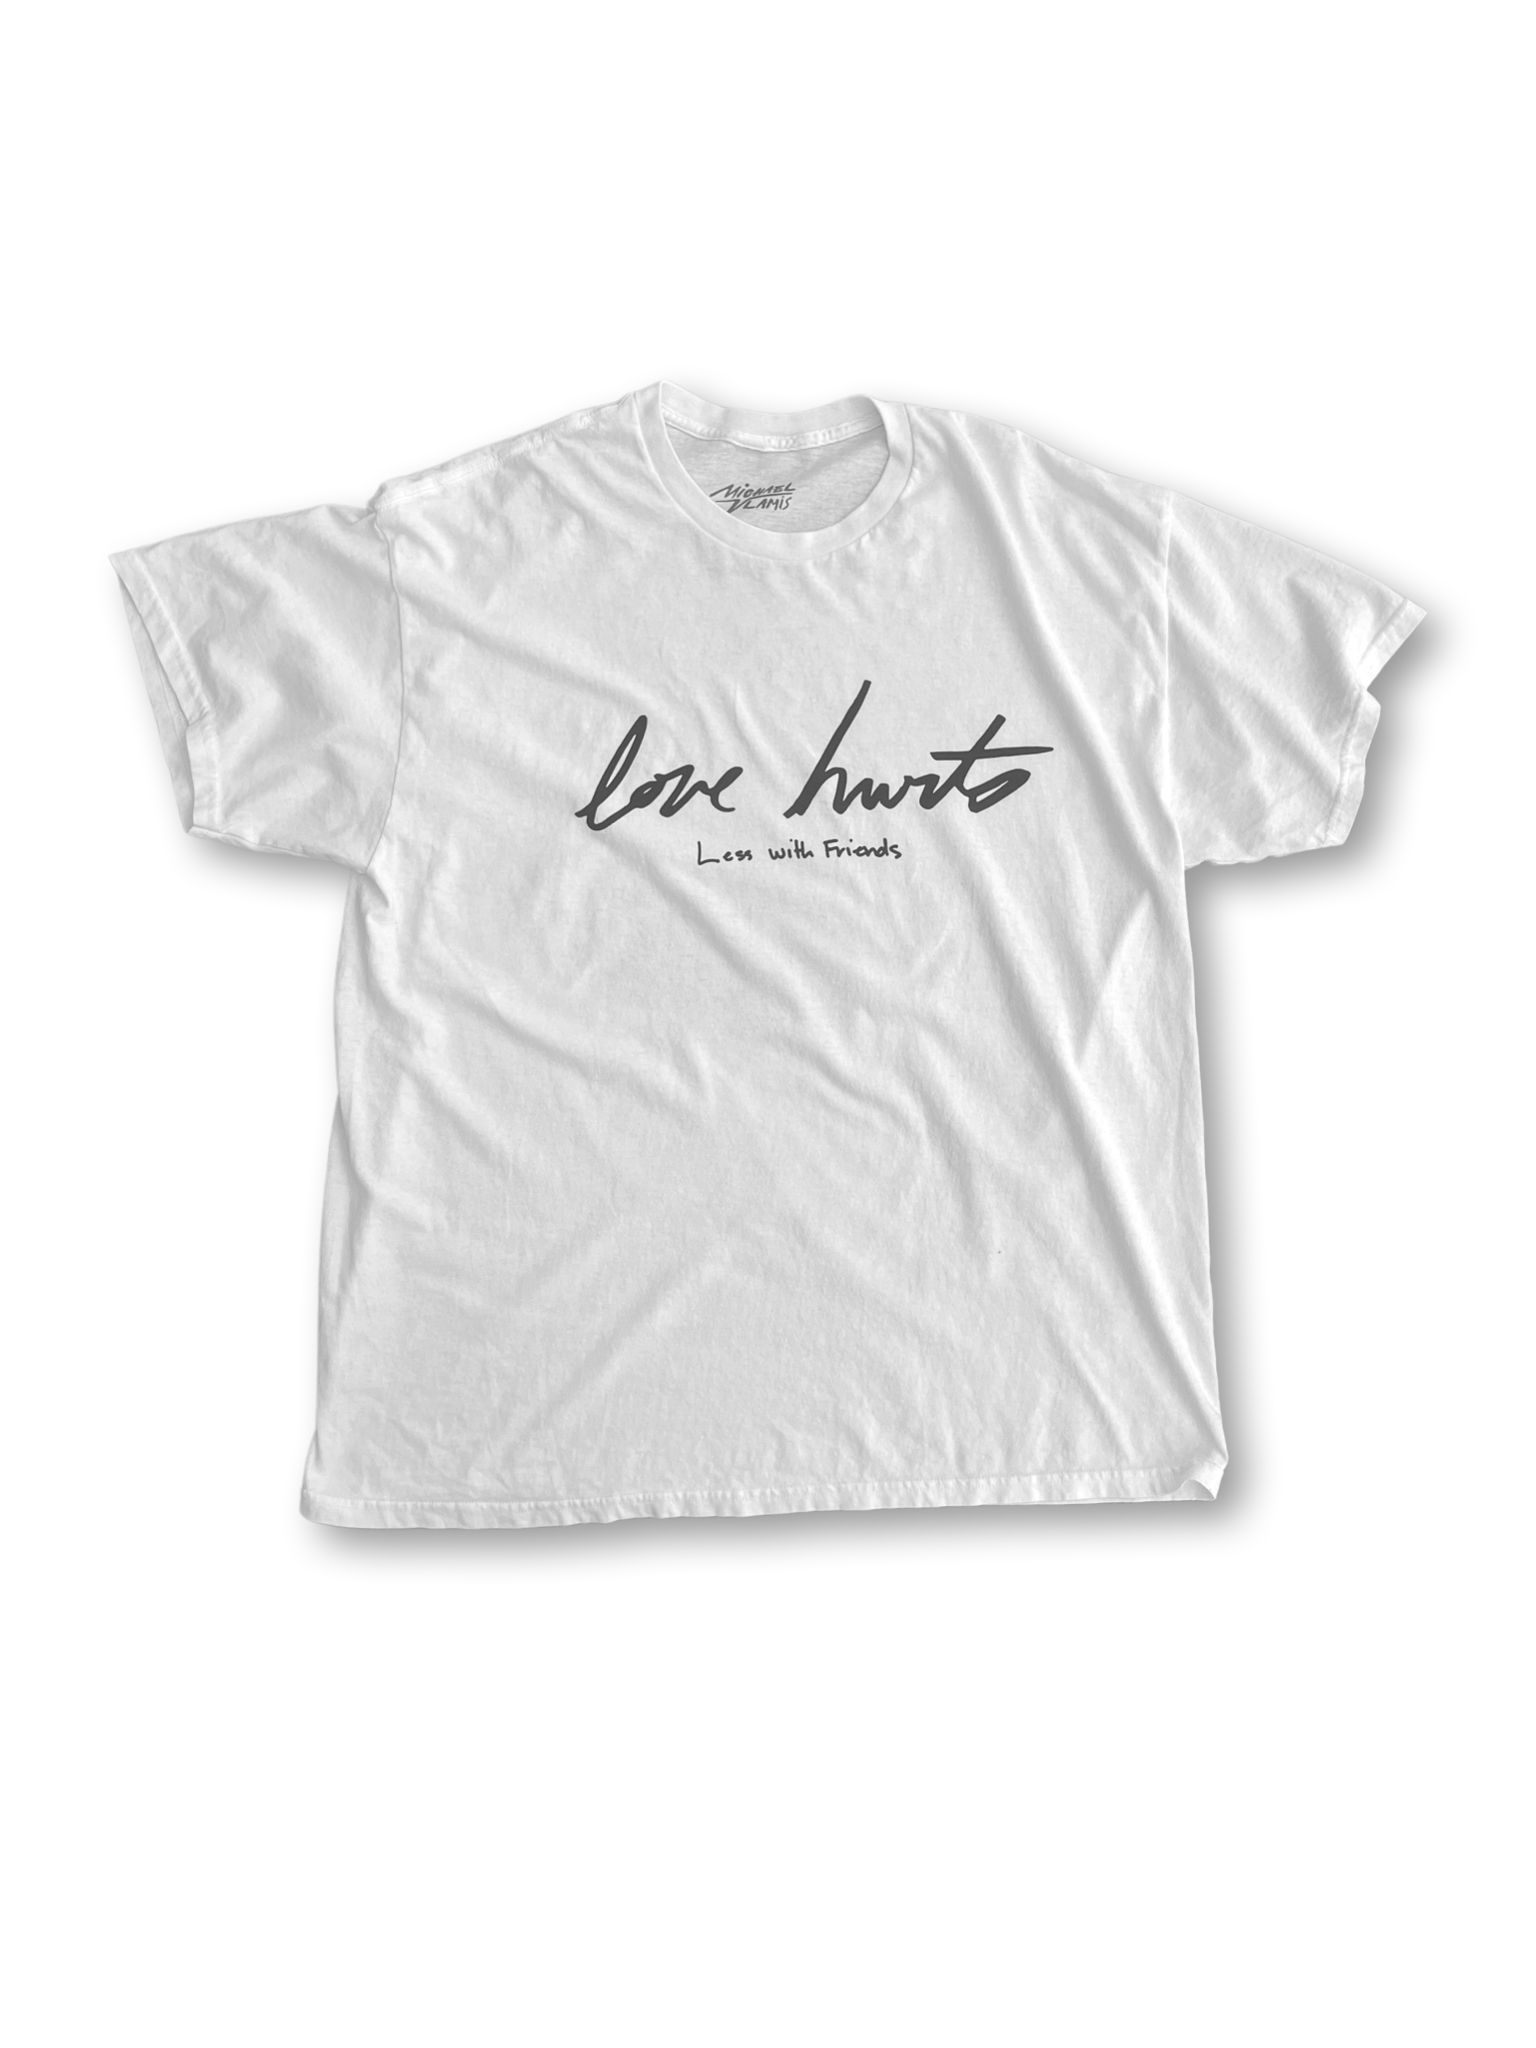 LOVE HURTS LESS WITH FRIENDS SS TEE